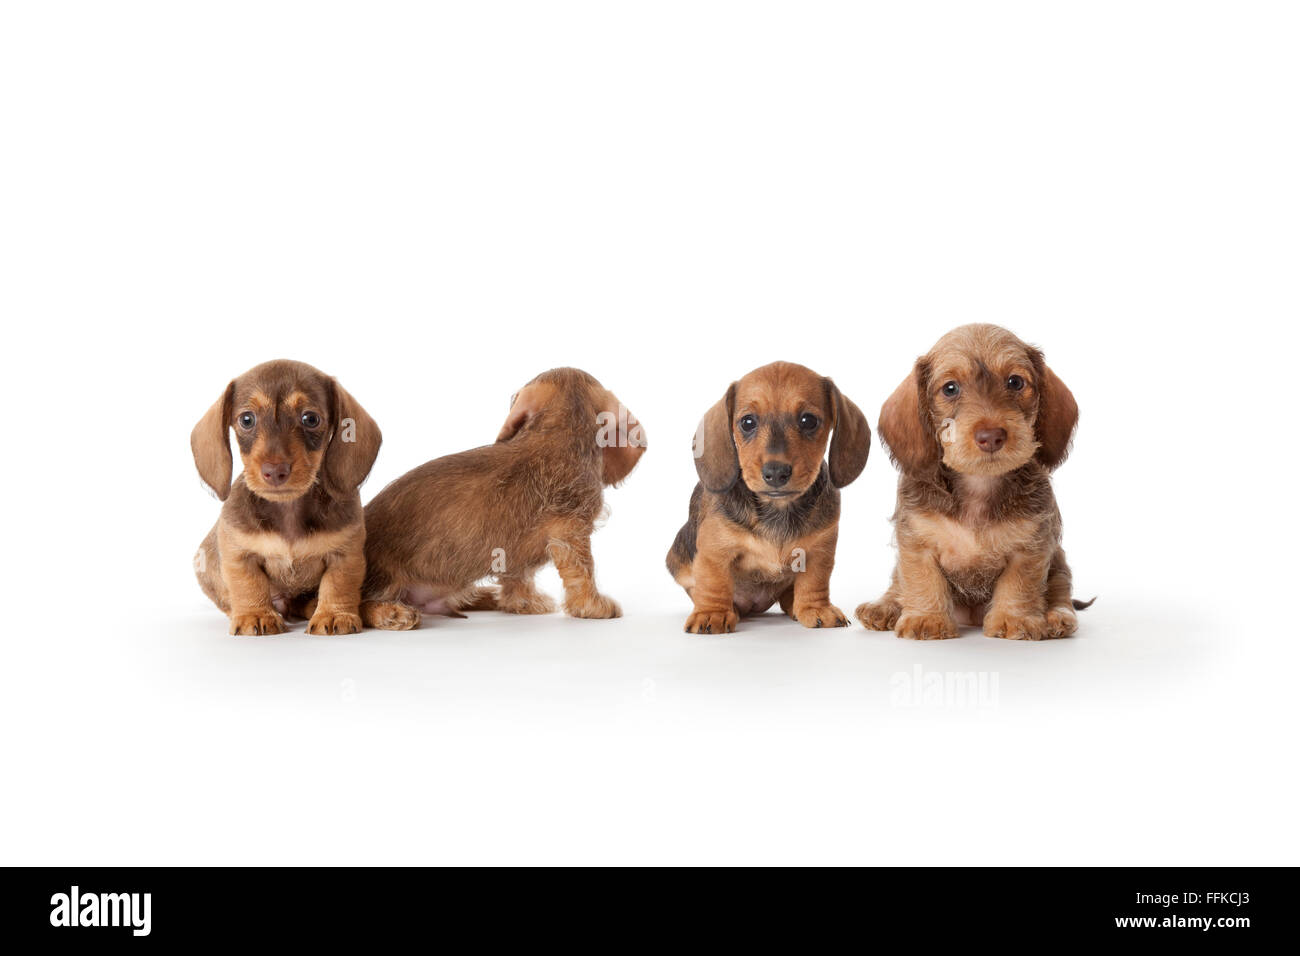 Four wire-haired dachshund puppies on white background Stock Photo